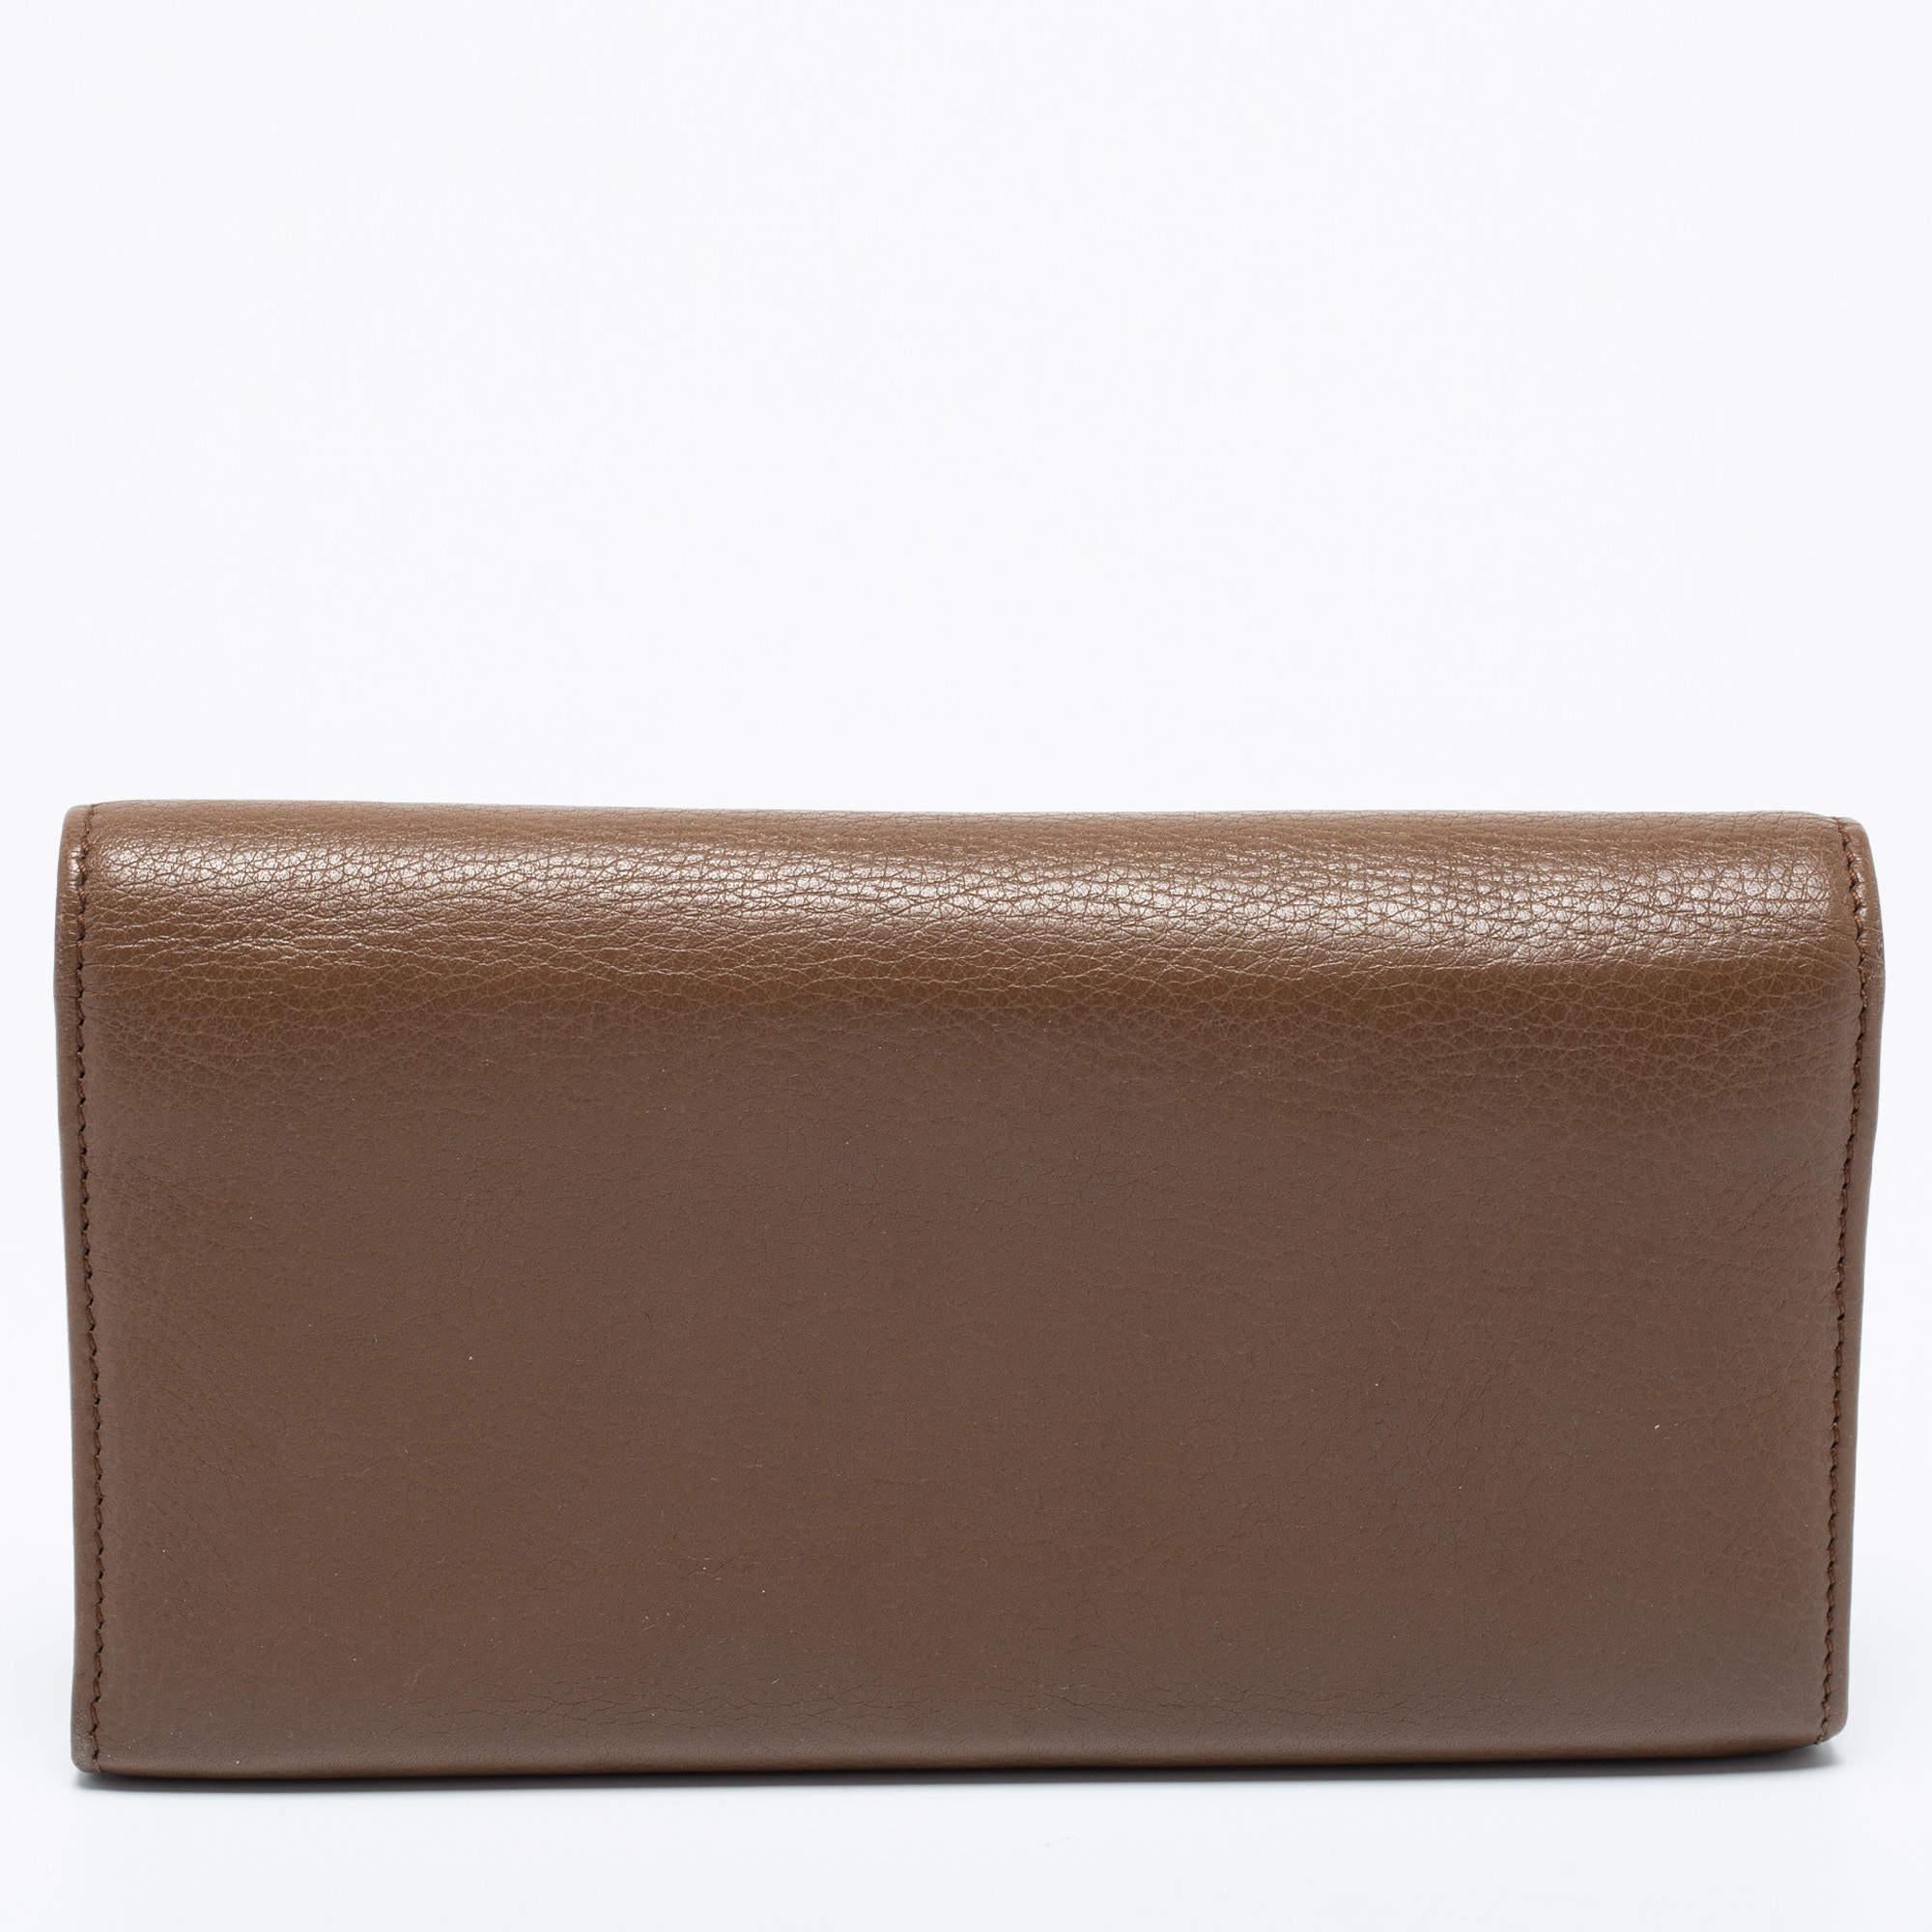 Made of brown leather, this Soho continental wallet from Gucci is a classy choice. It has a zip pocket and multiple card slots. The wallet is complete with the GG logo on the front.

